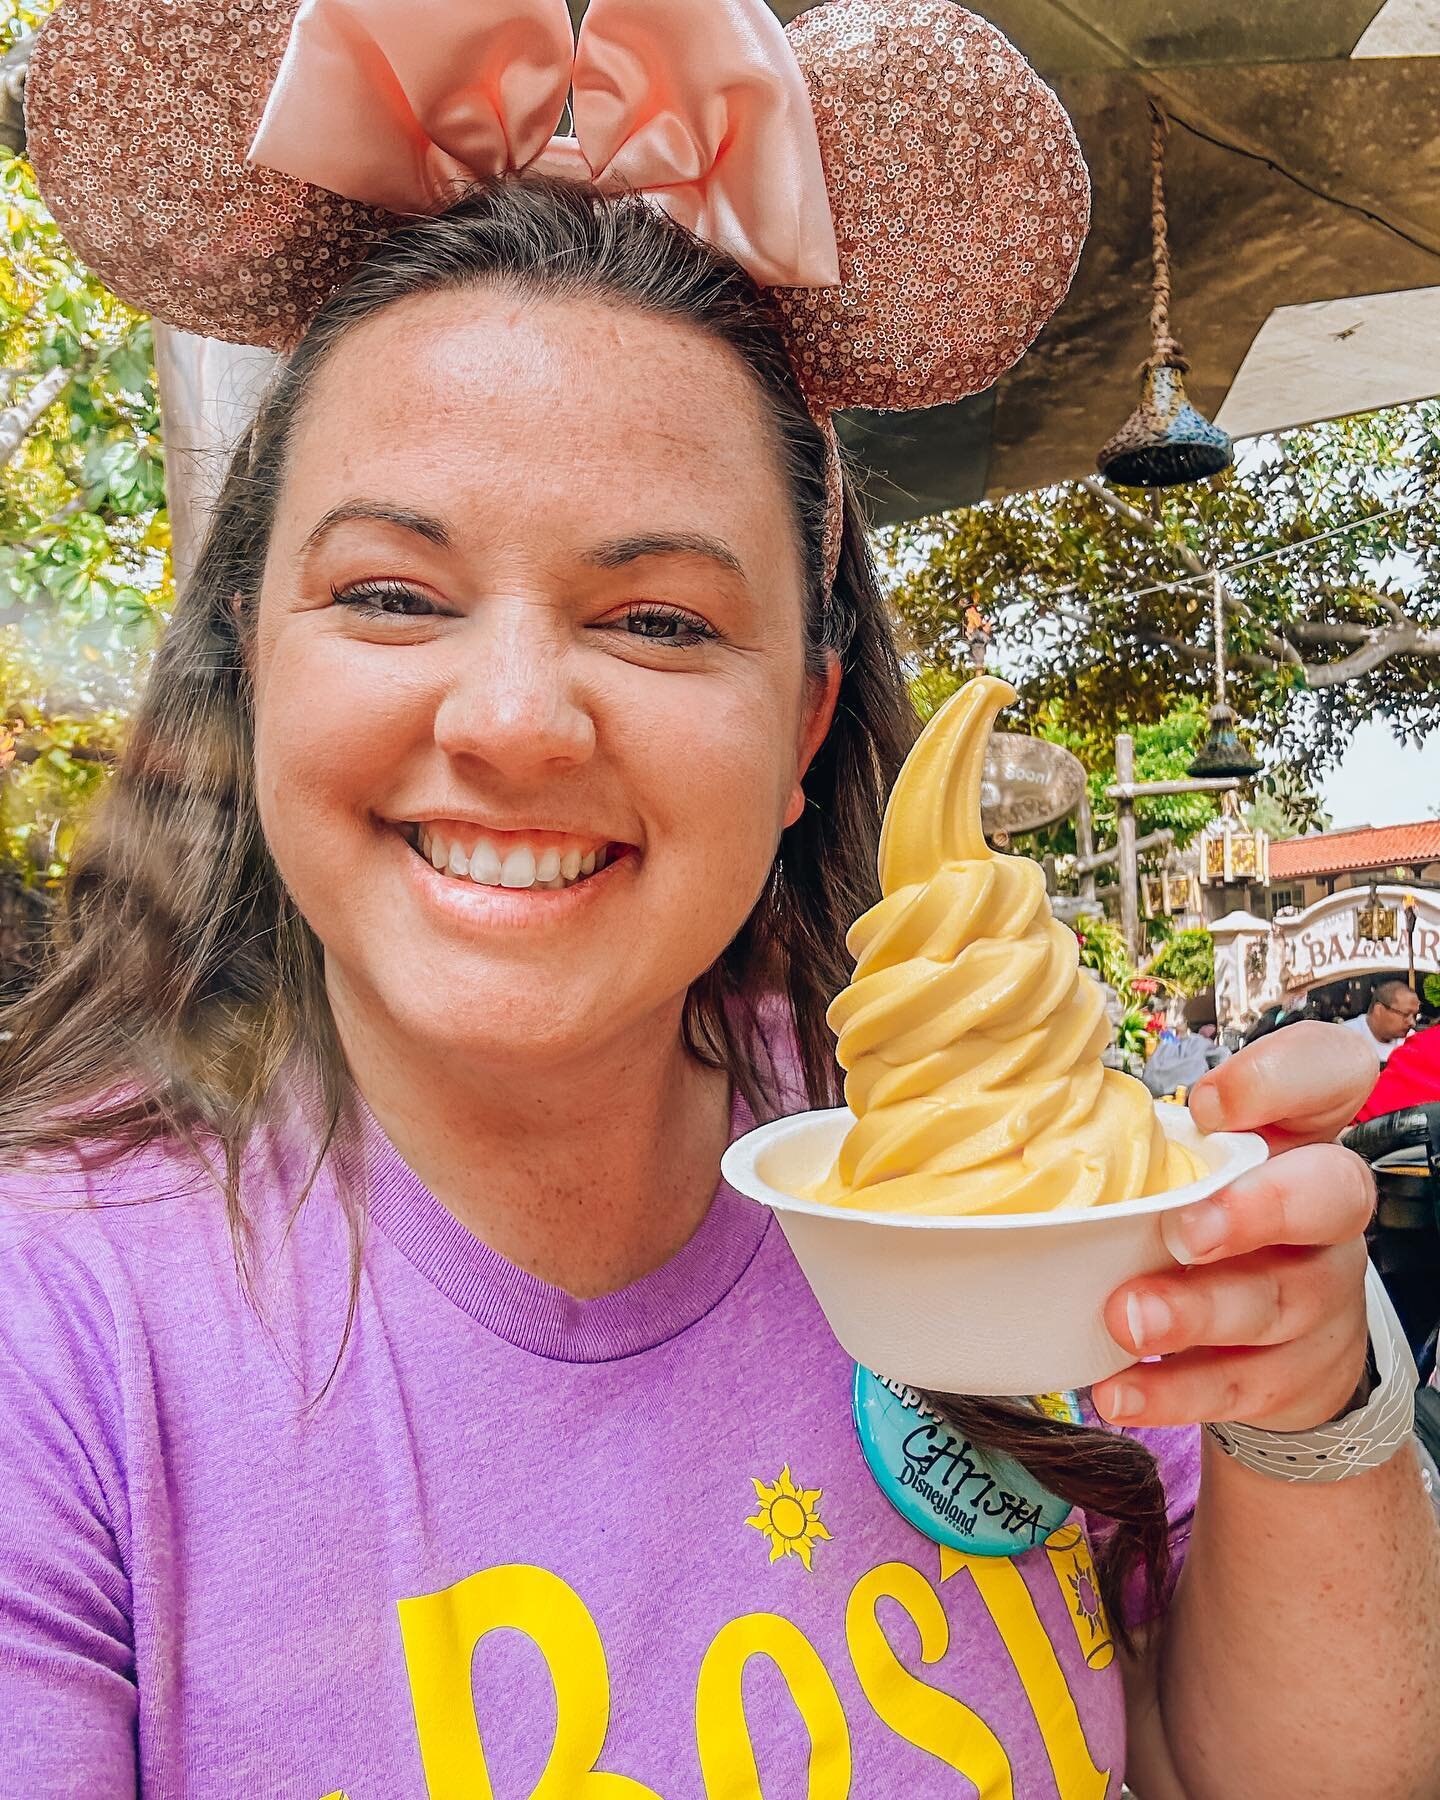 An ode to my favorite, classic Disney snack: the Dole Whip! I&rsquo;ll take you in any form-swirl, float, different flavors (except coconut), with cake, you&rsquo;re just THE BEST! My favorite time to have you is after a ride on Jungle Cruise. 

Happ